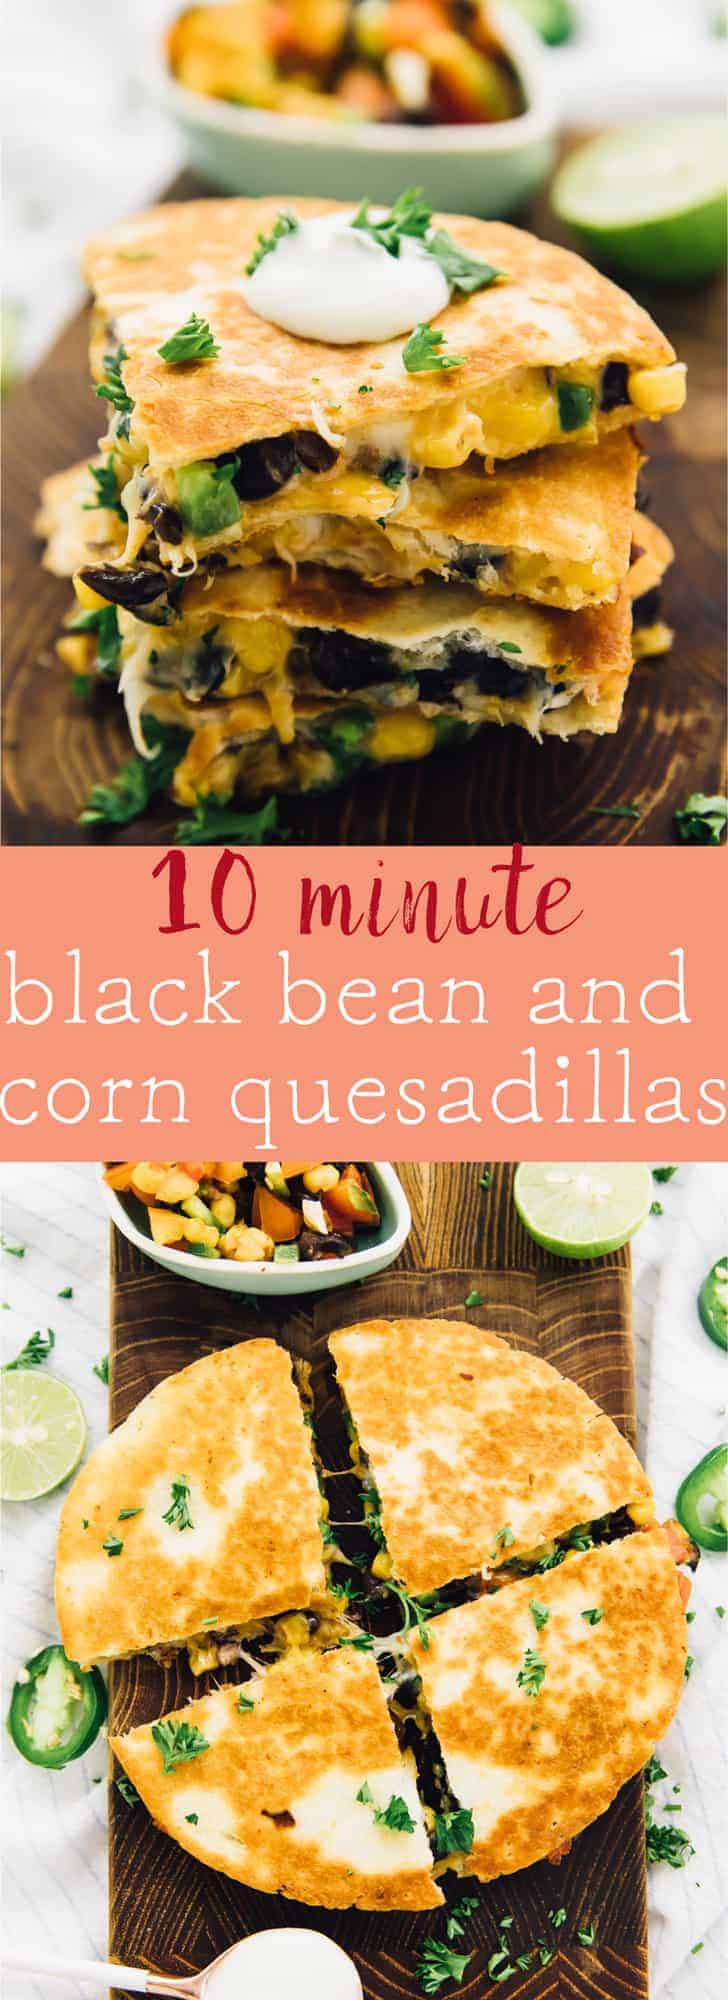 These 10 Minute Black Bean and Corn Quesadillas are so perfect for a quick weeknight dinner! They come together incredibly quick and are so flavourful! via https://jessicainthekitchen.com